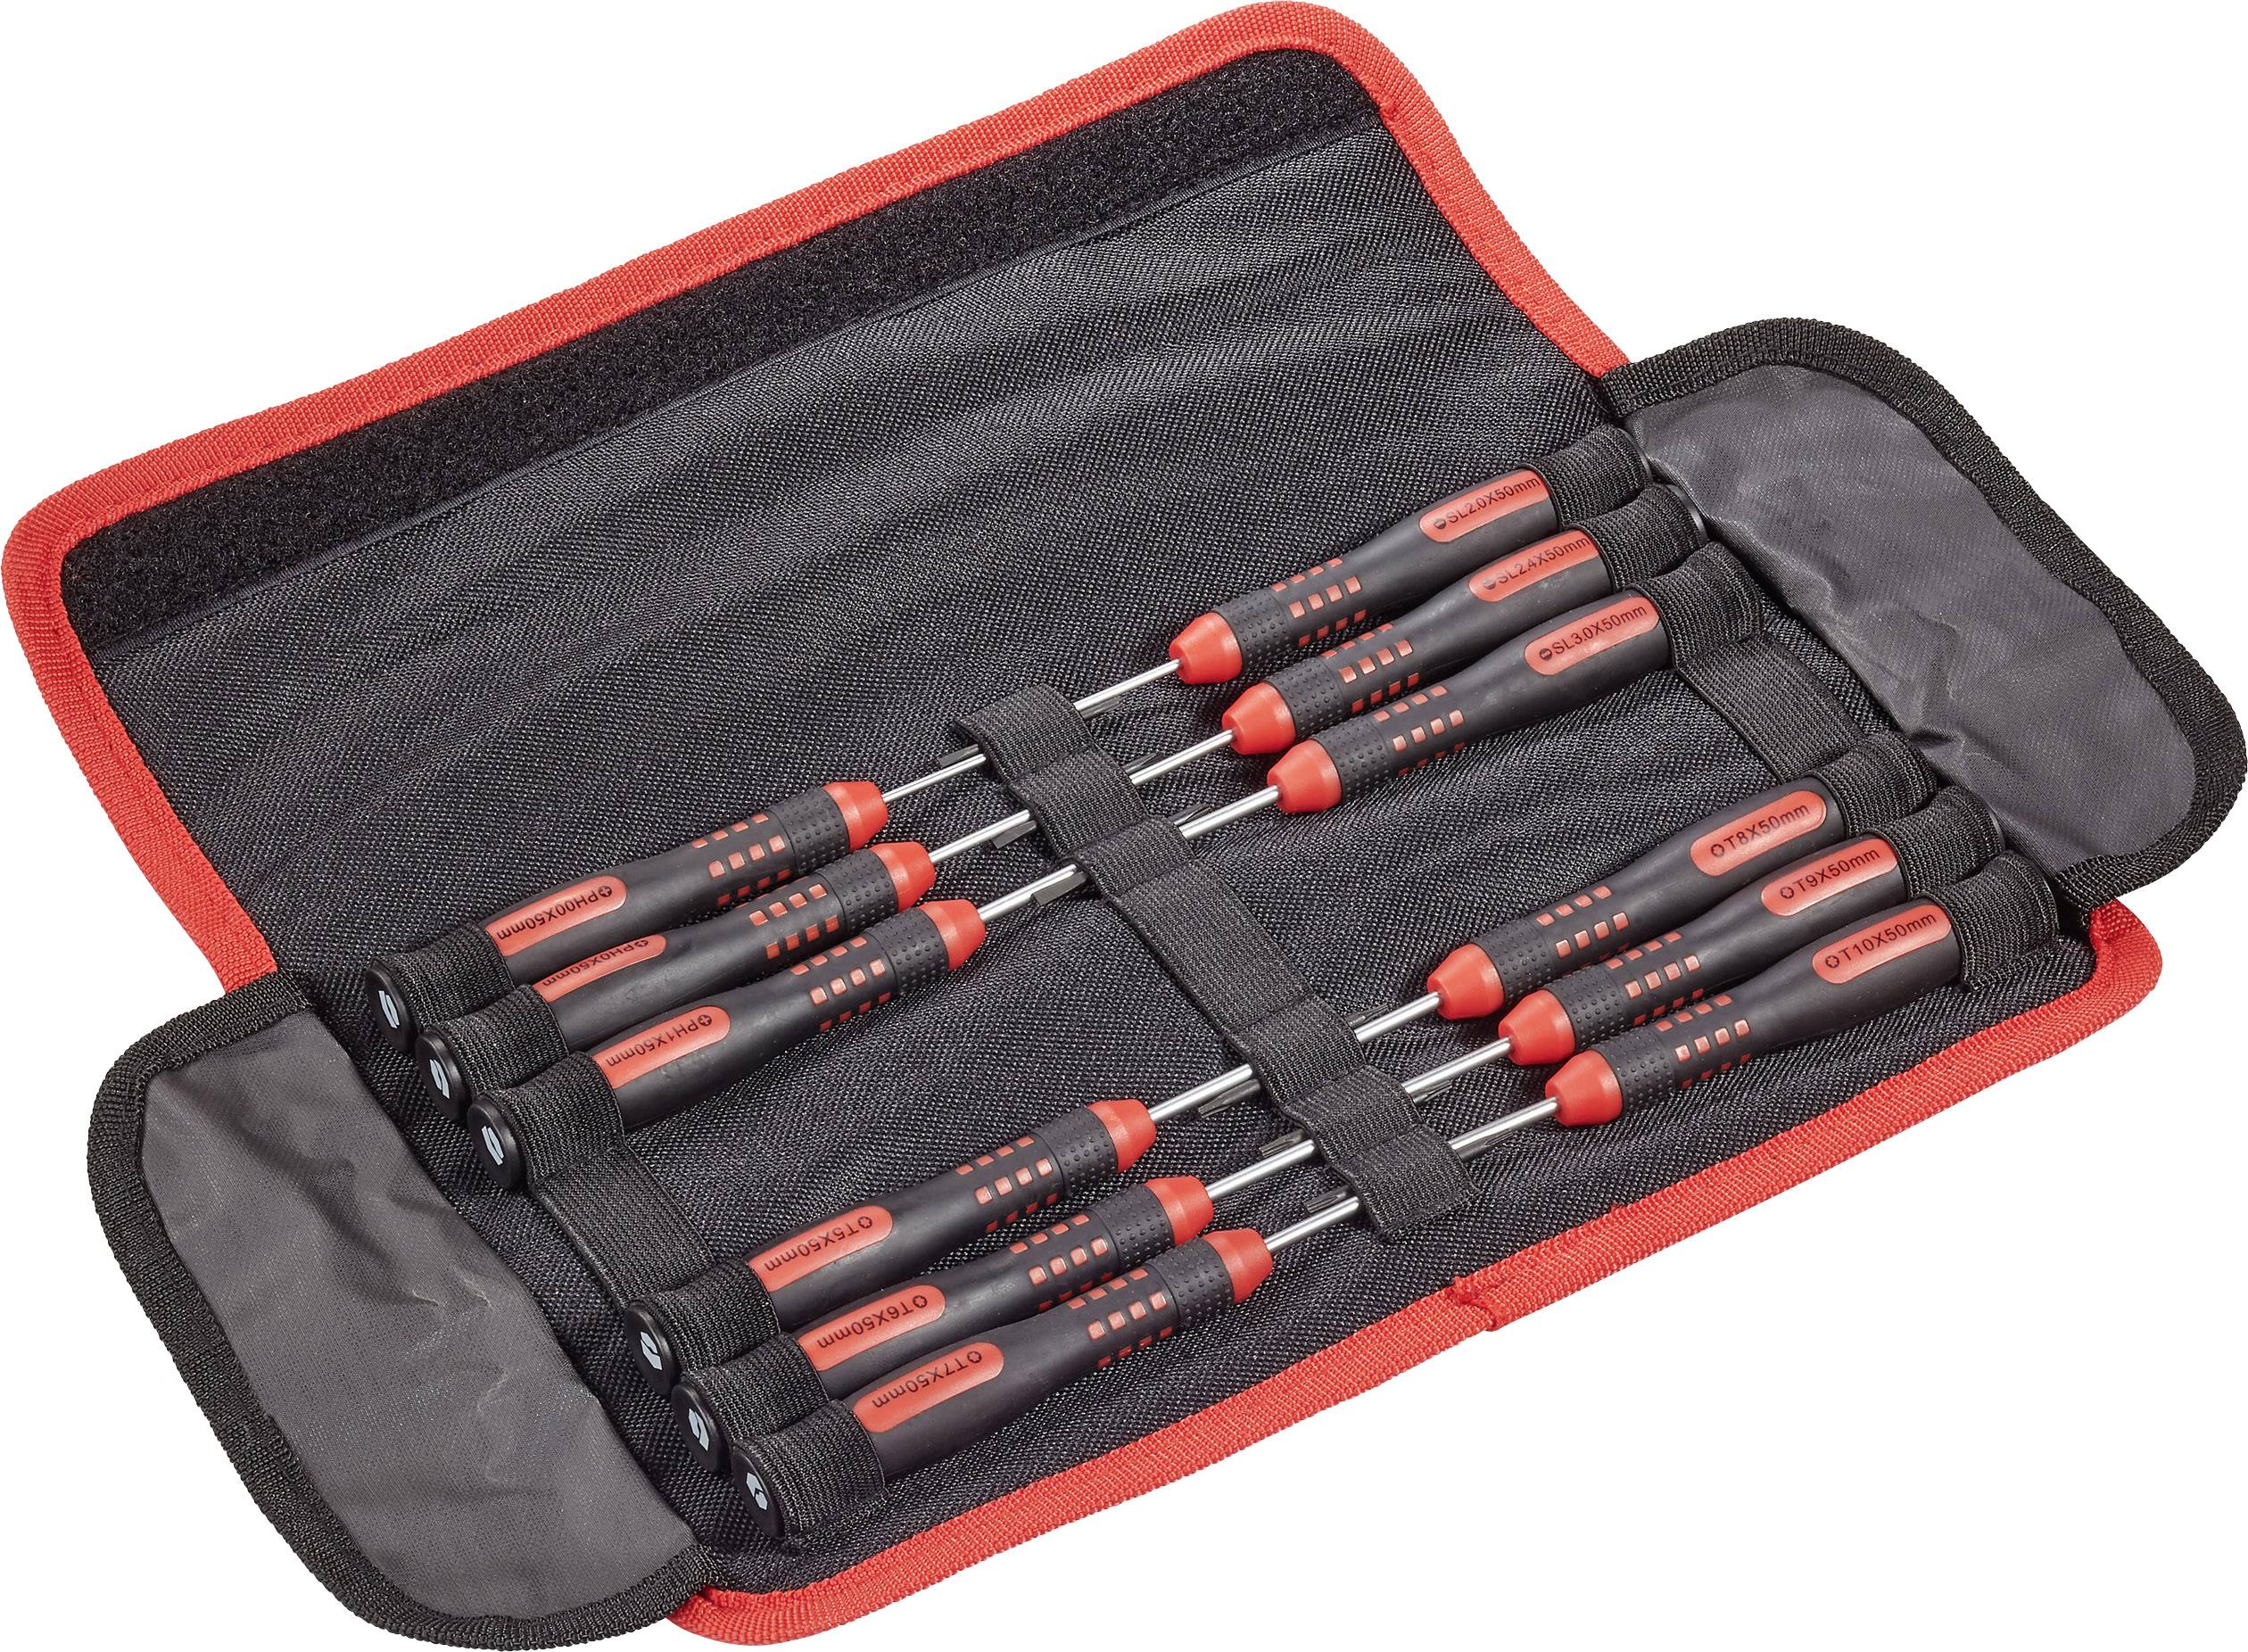 TOOLCRAFT Electrical  precision engineering Screwdriver set 12-piece Slot,  Phillips, Star